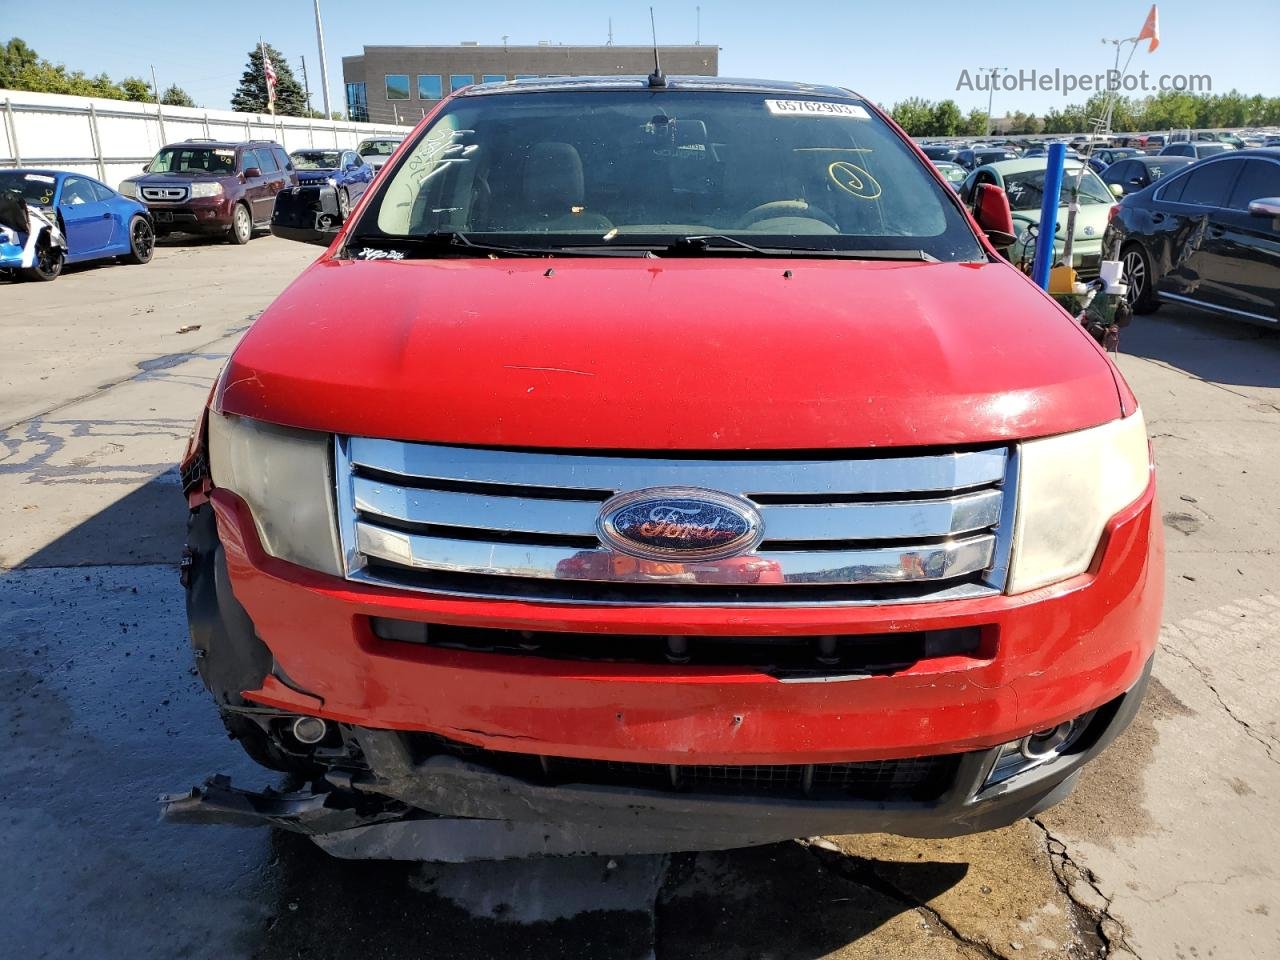 2010 Ford Edge Limited Red vin: 2FMDK4KCXABA80171